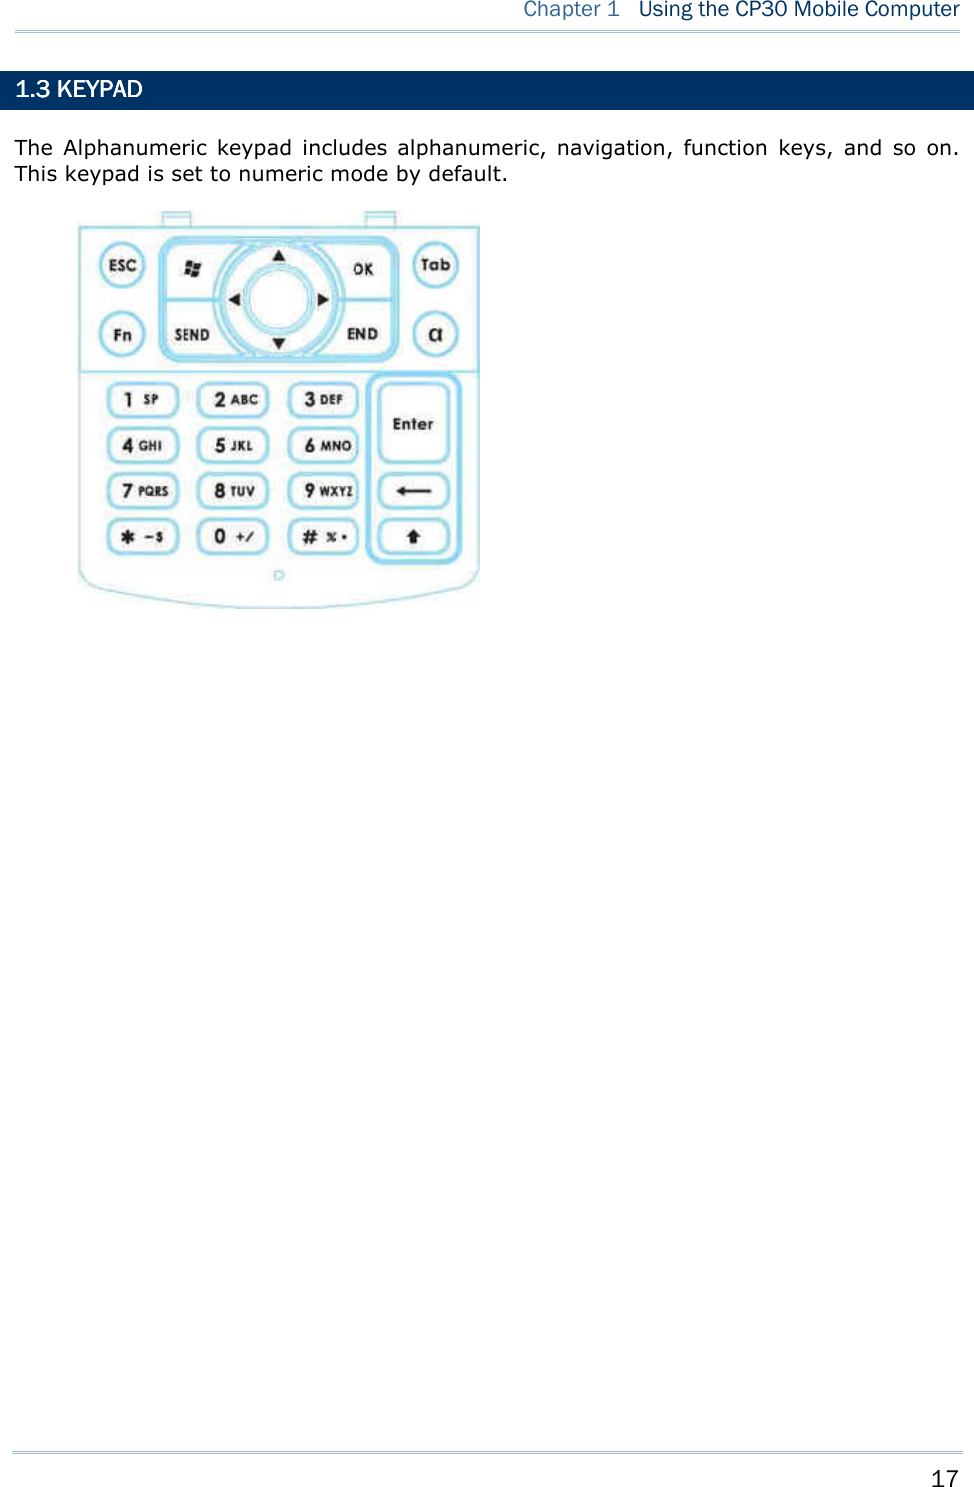    17   Chapter 1   Using the CP30 Mobile Computer 1.3 KEYPAD1.3 KEYPAD1.3 KEYPAD1.3 KEYPAD    The  Alphanumeric  keypad  includes  alphanumeric,  navigation,  function  keys,  and  so  on. This keypad is set to numeric mode by default.                           